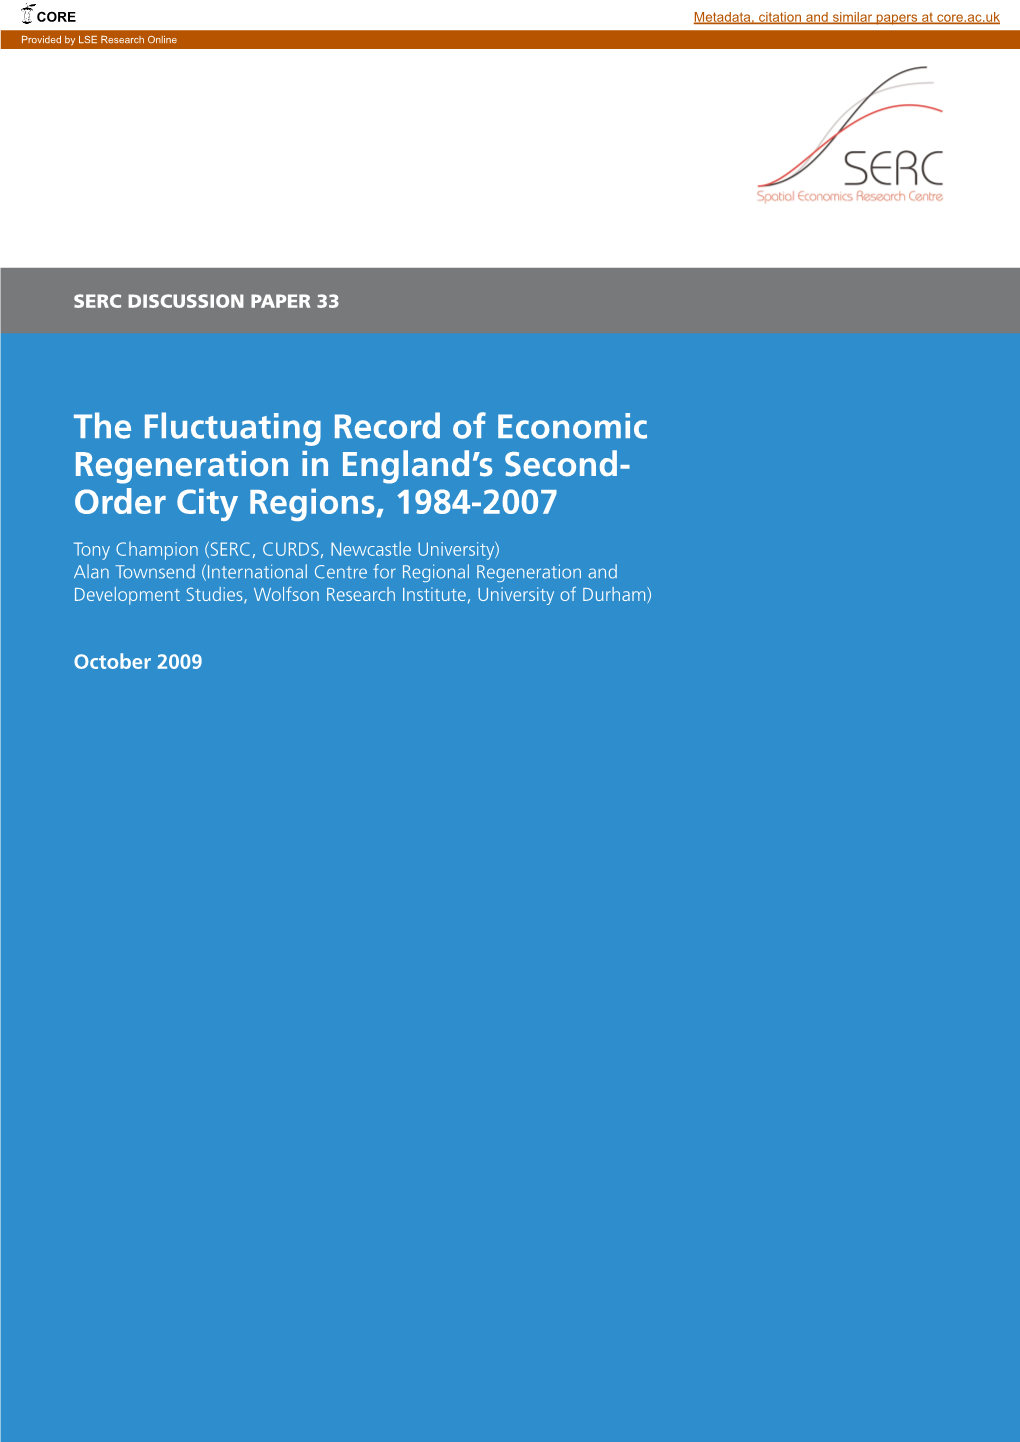 The Fluctuating Record of Economic Regeneration in England's Second